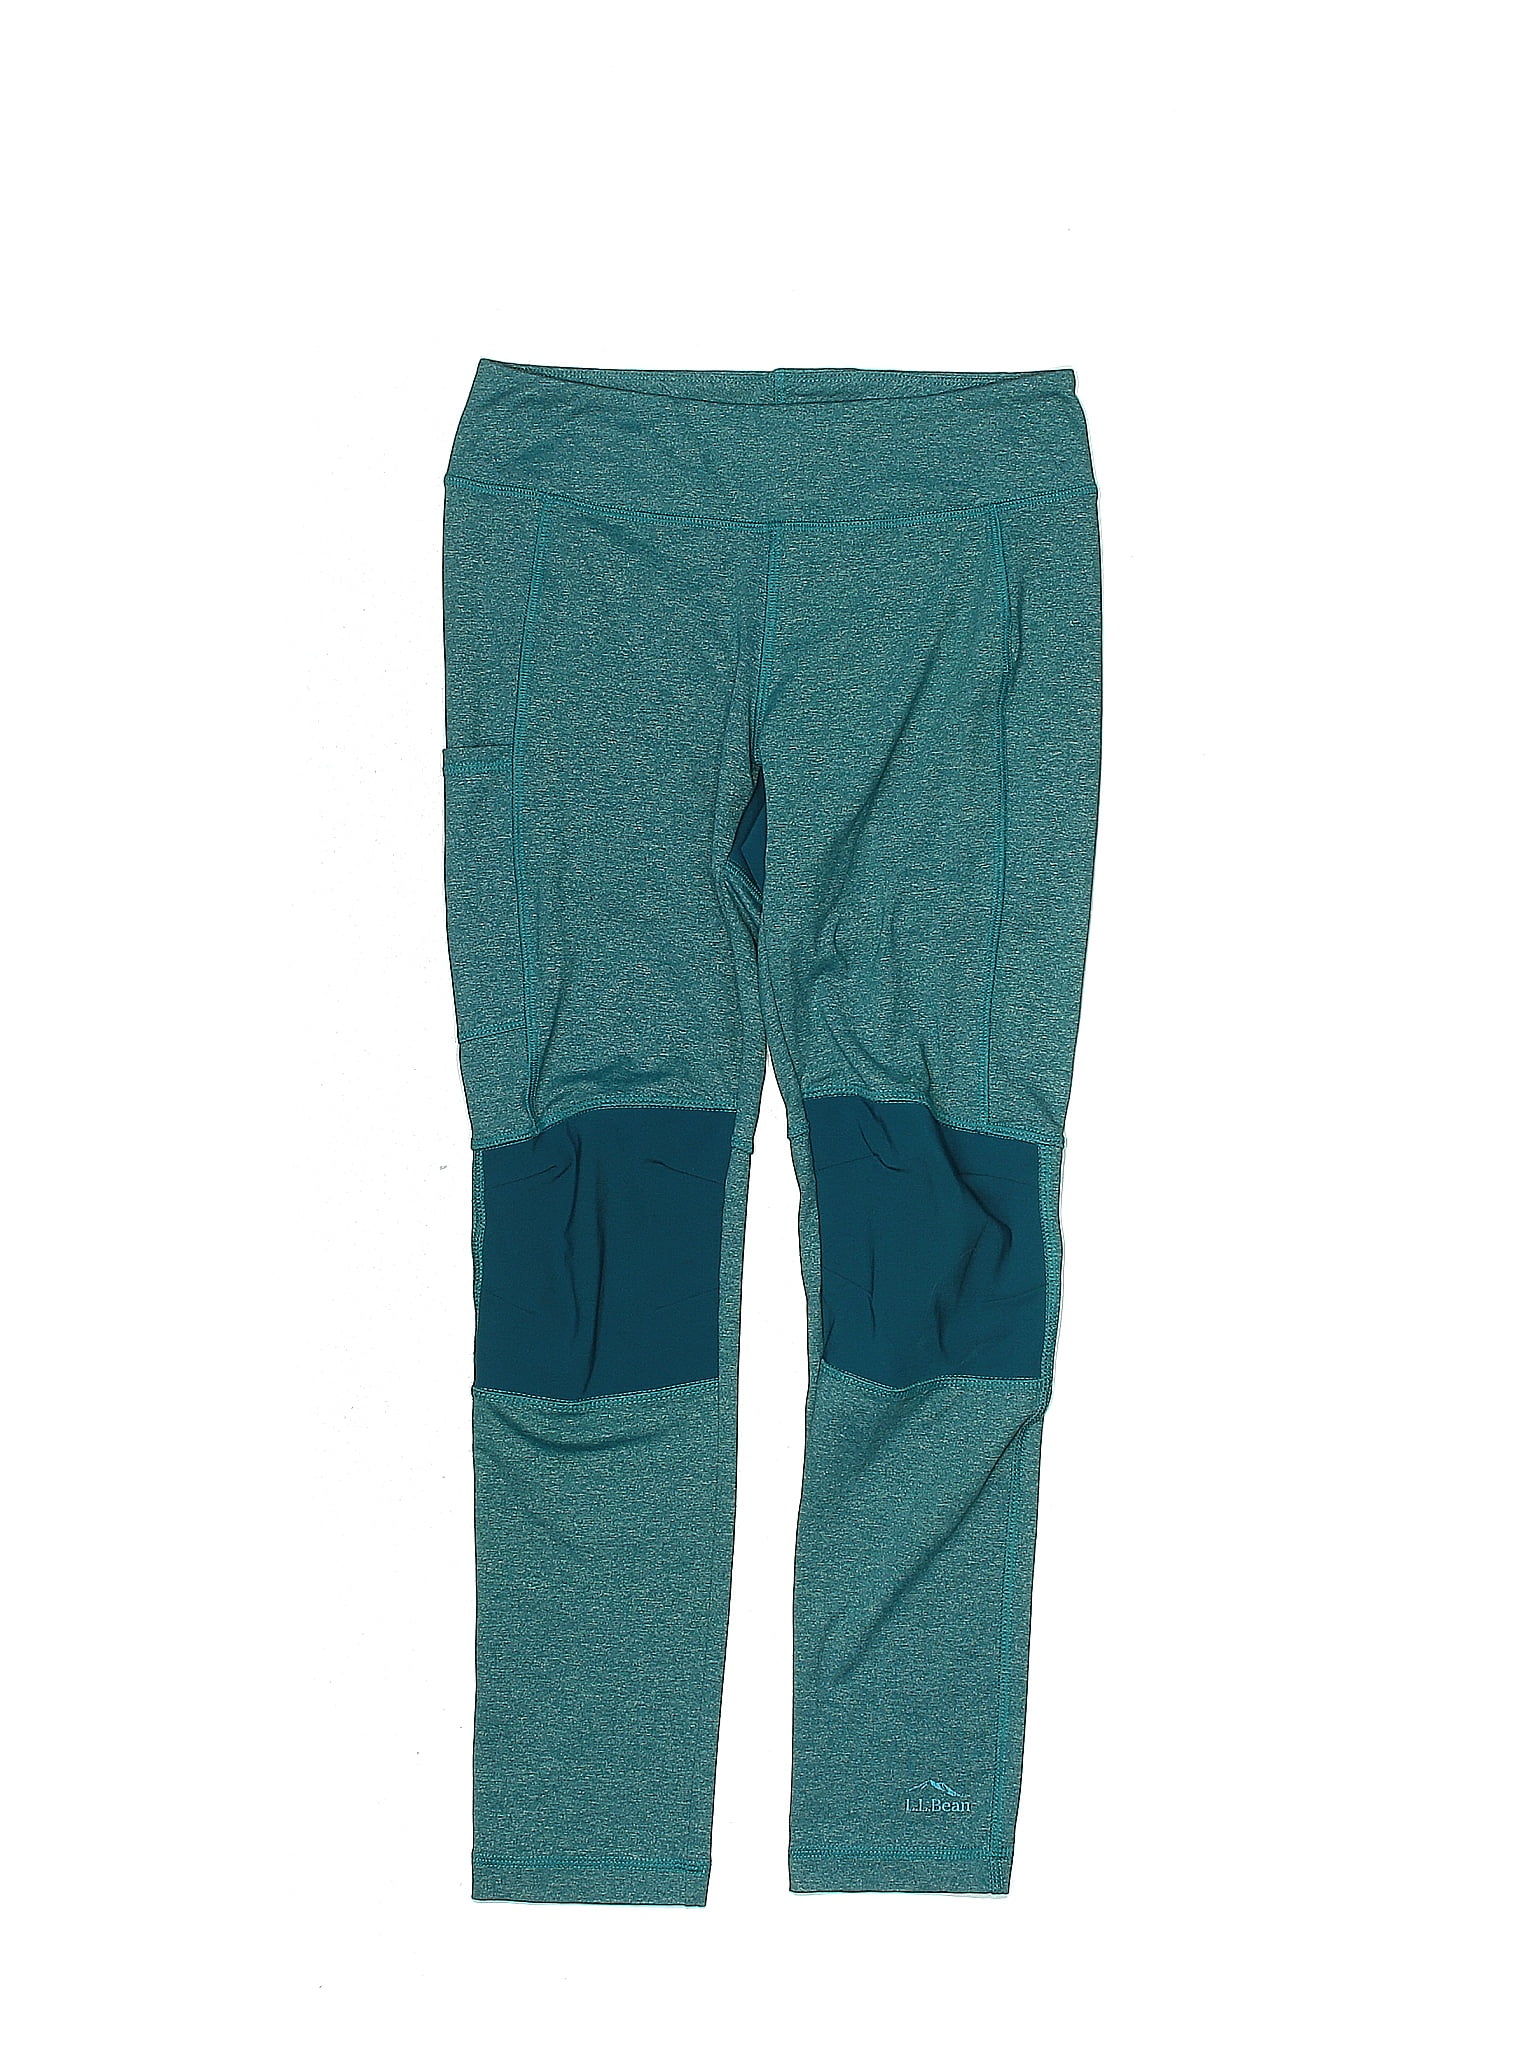 L.L.Bean Marled Teal Casual Pants Size 12 - 77% off